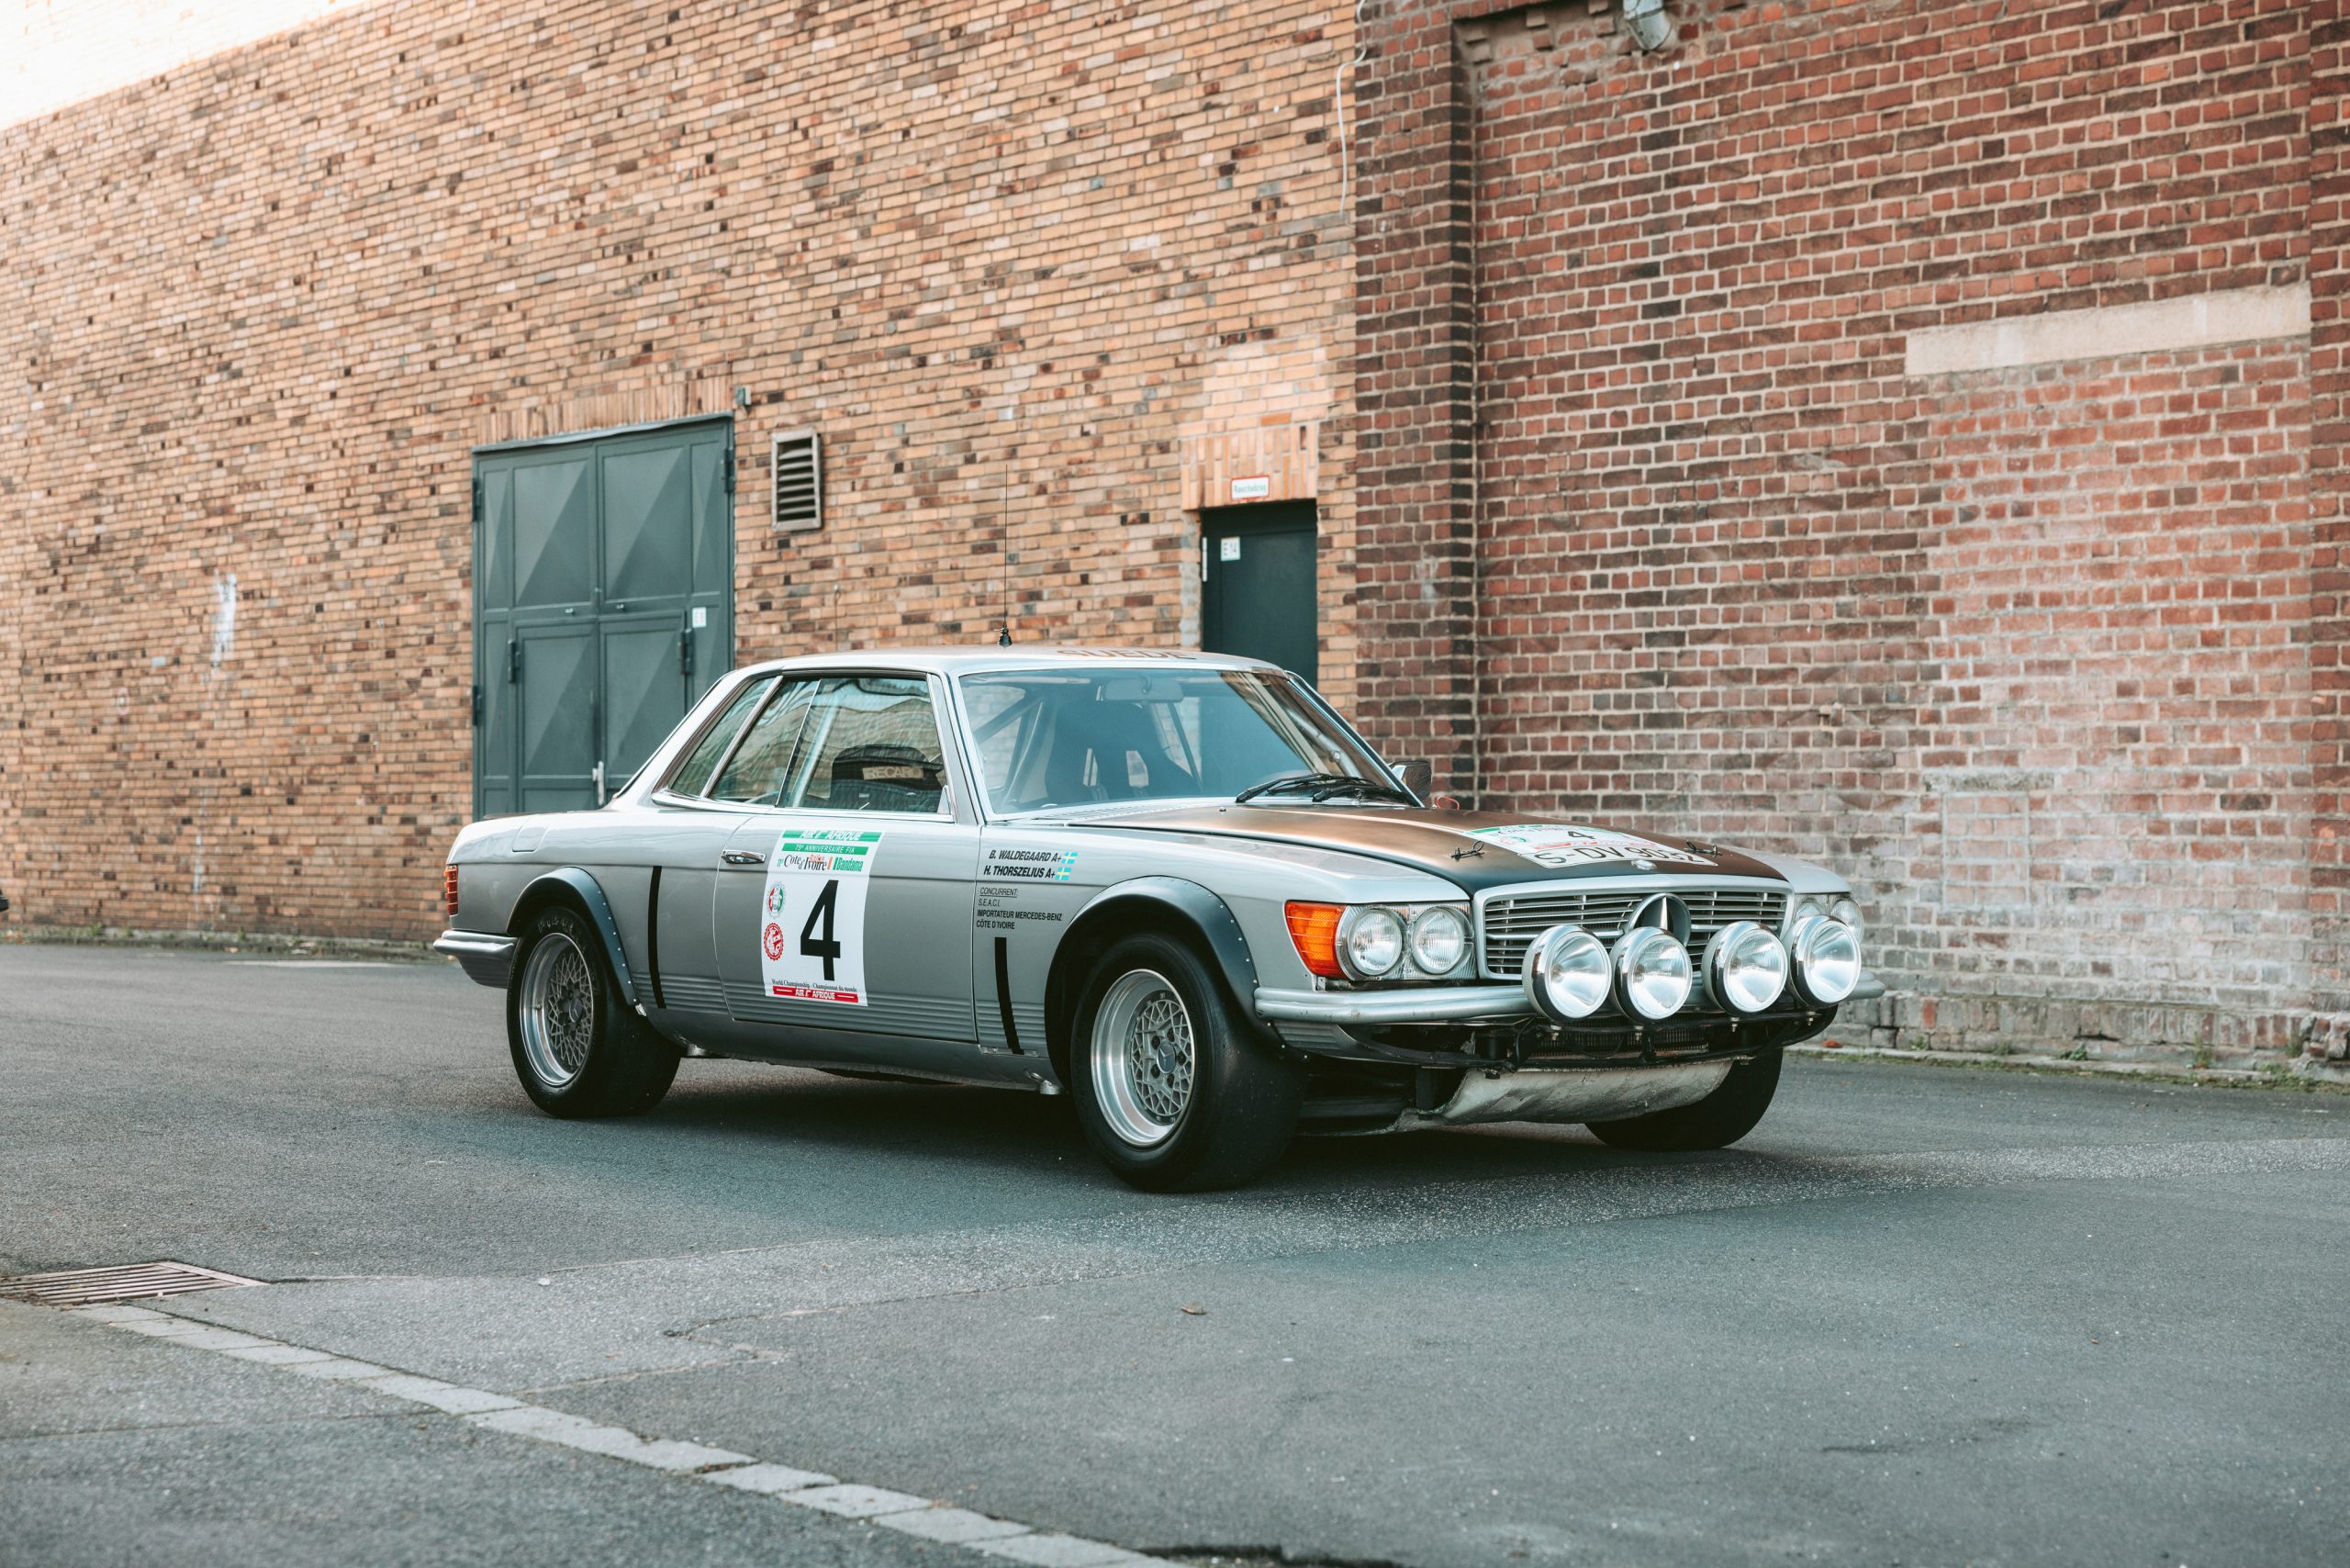 When Mercedes went rallying with a V8-engined, automatic coupé